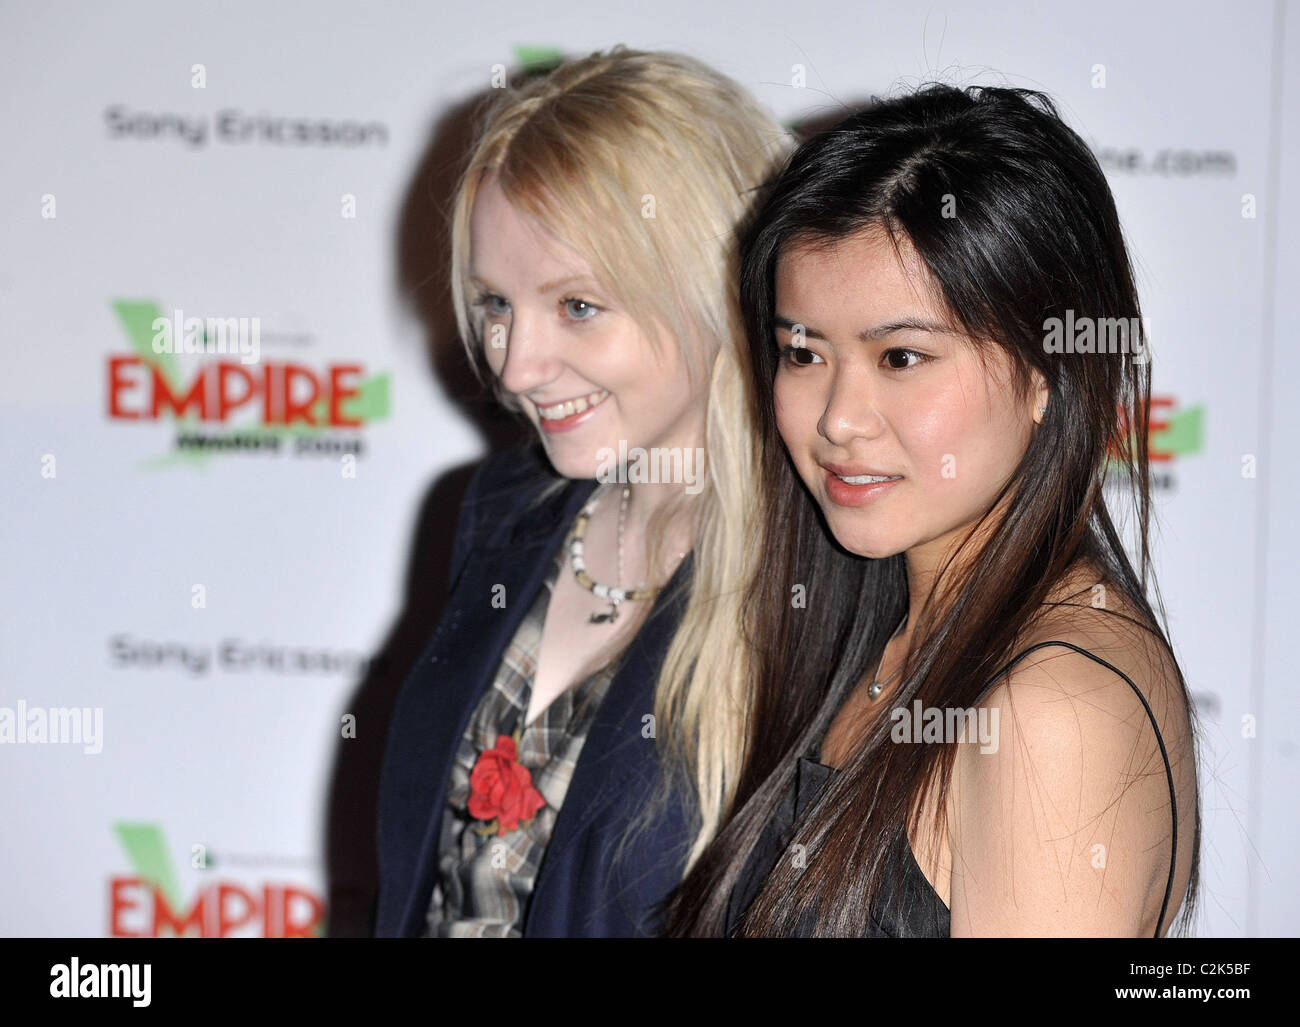 Katie Leung and Evanna Lynch Empire Awards held at the Grosvenor House London, England - 09.03.08  : Stock Photo